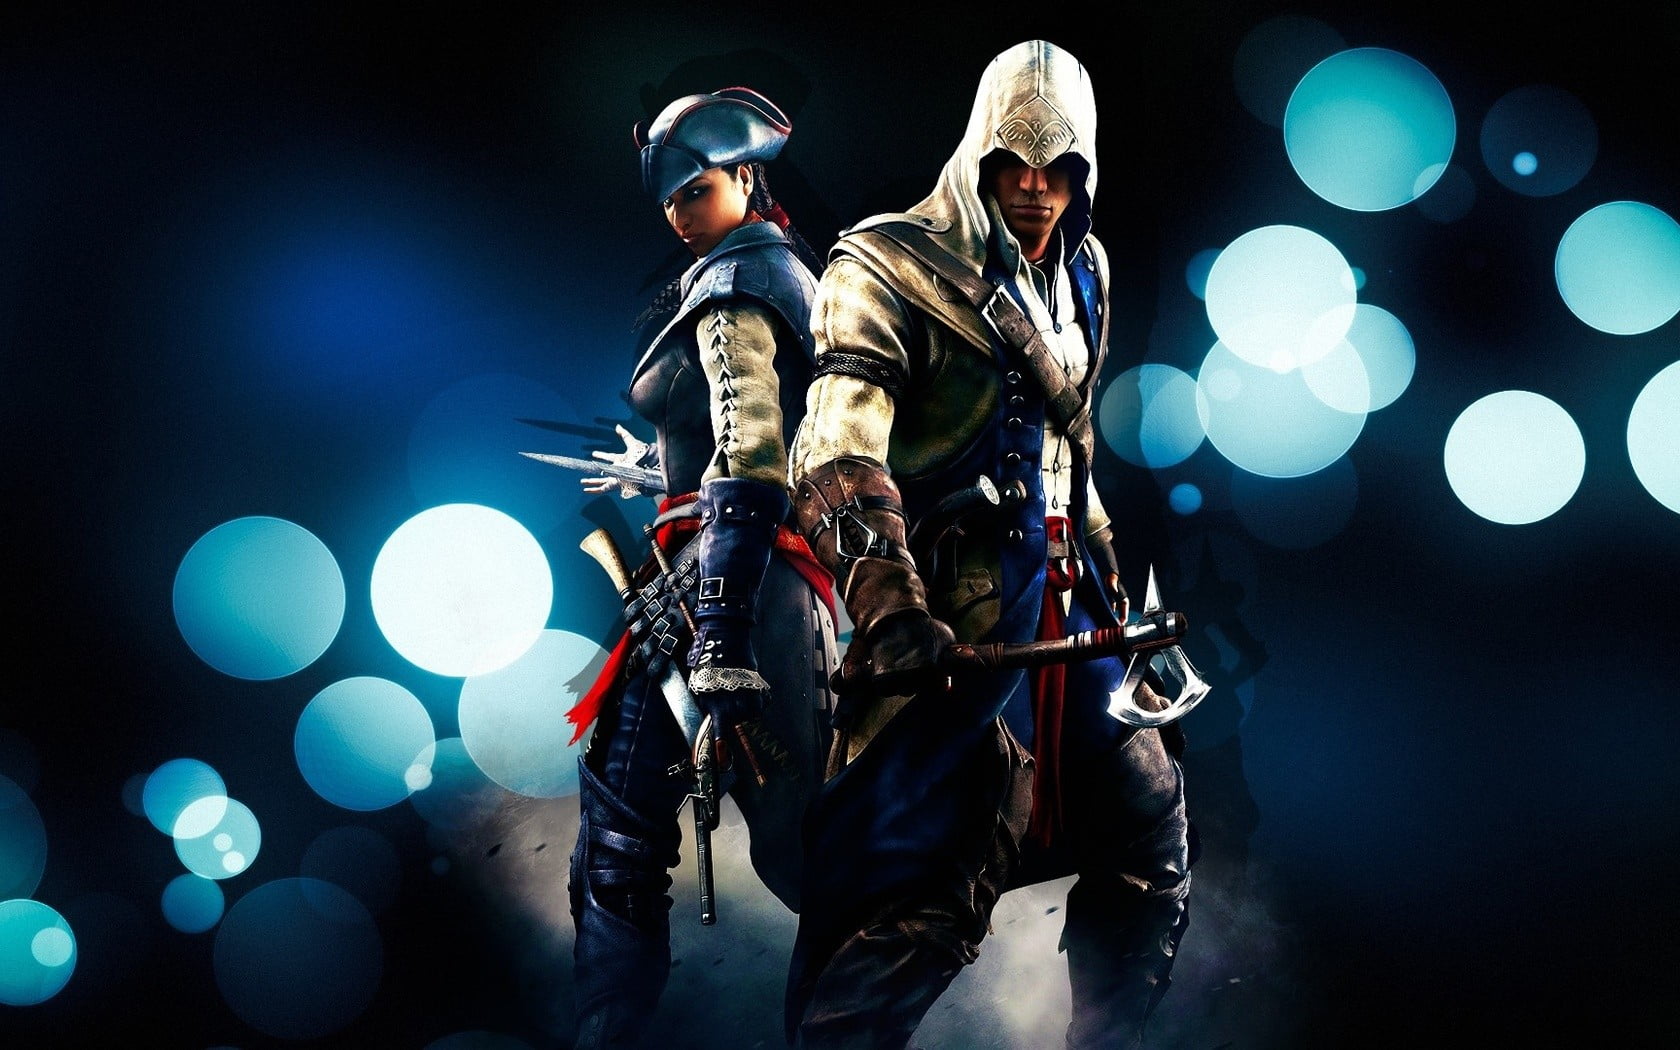 Assassin S Creed Character Illustration Assassin S Creed Video Games